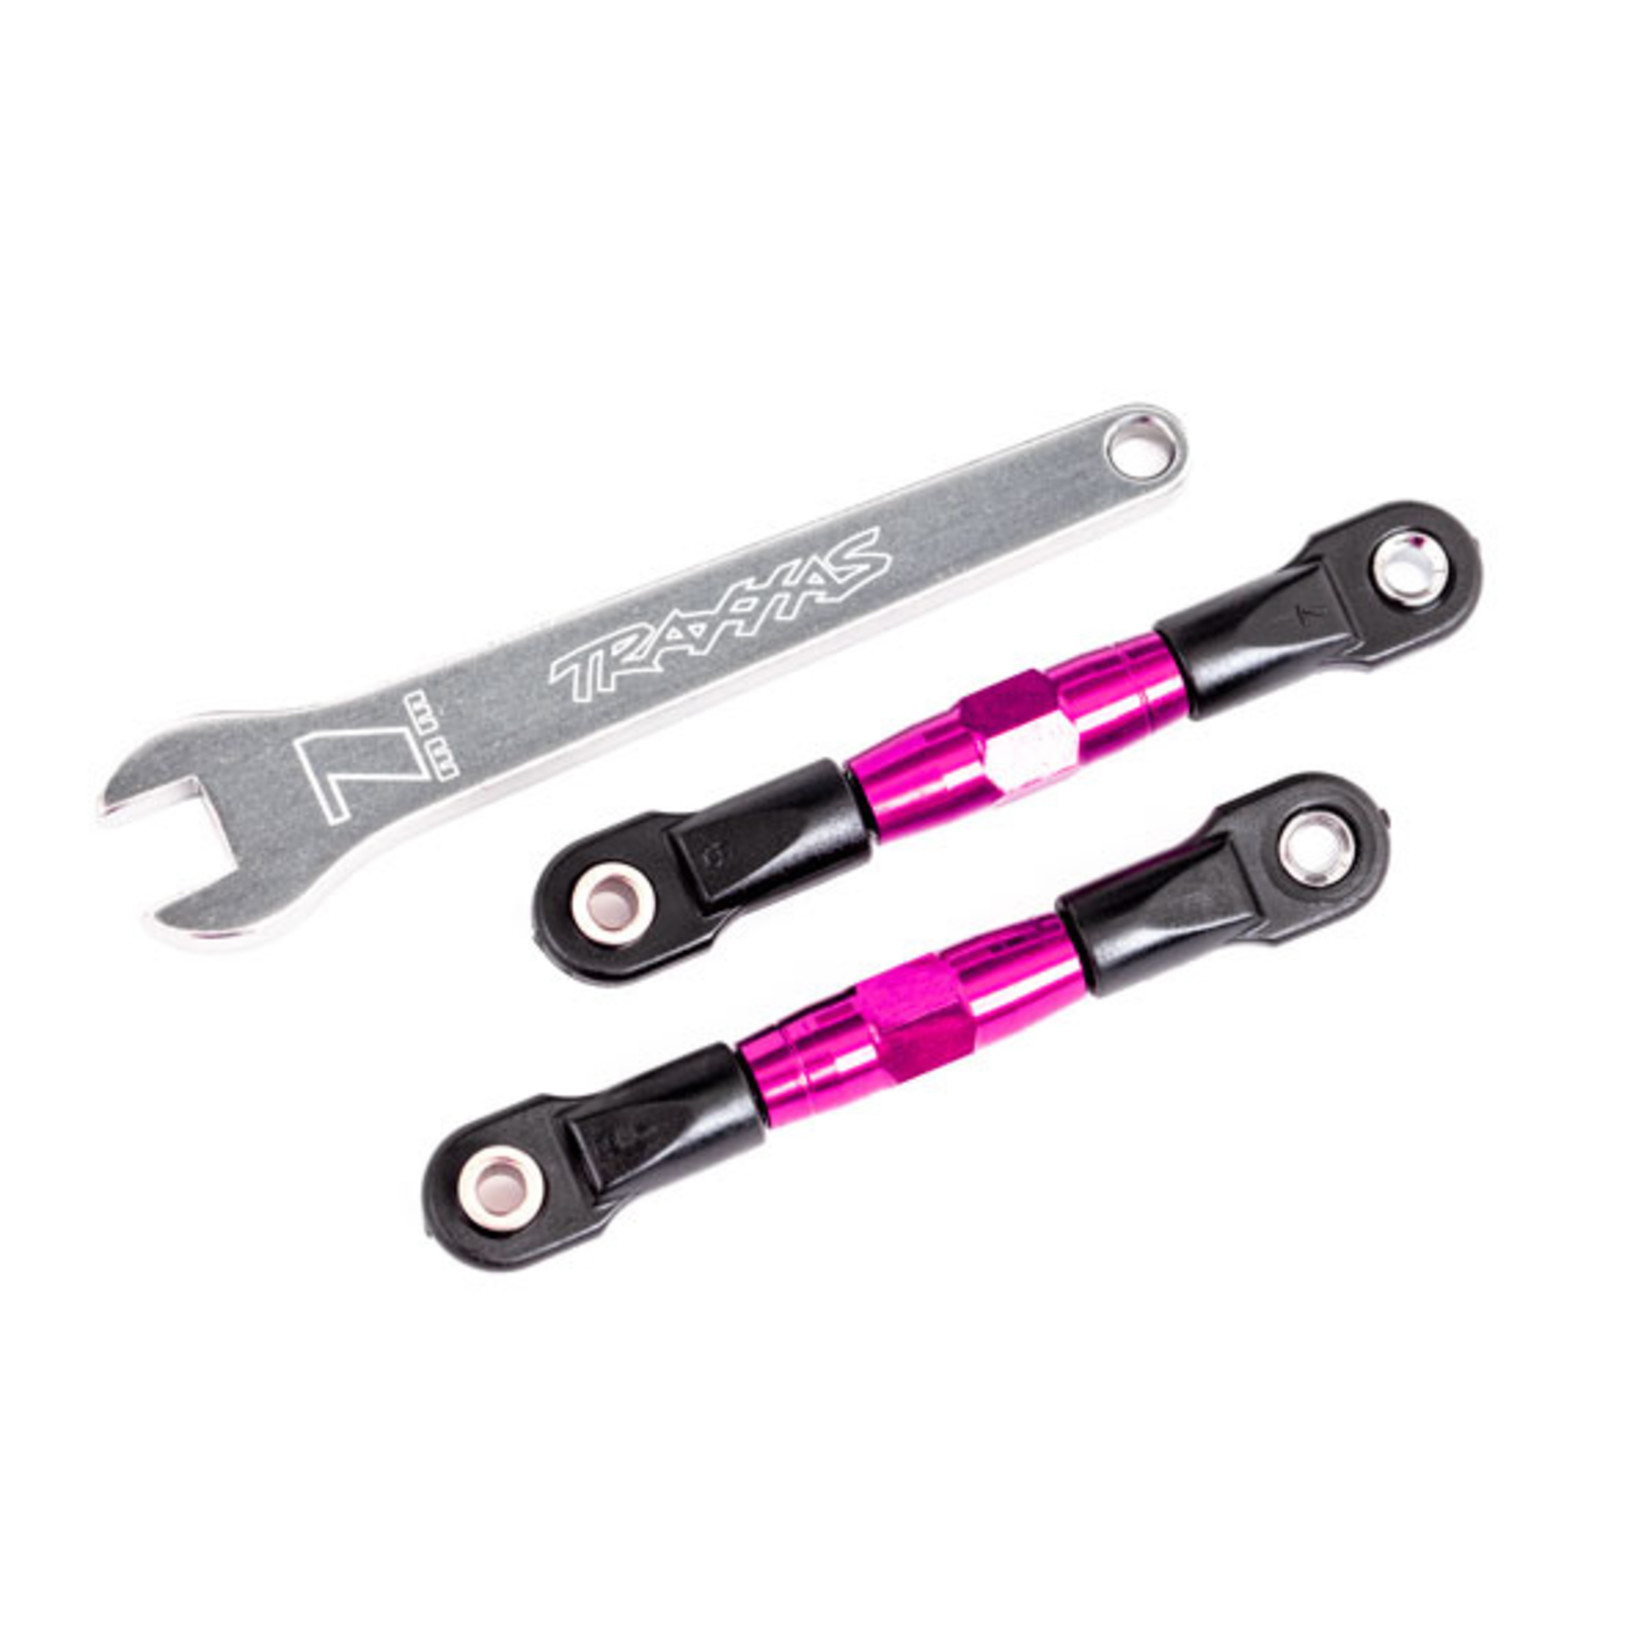 Traxxas 2443P - Camber links, rear (TUBES pink-anodized, 7075-T